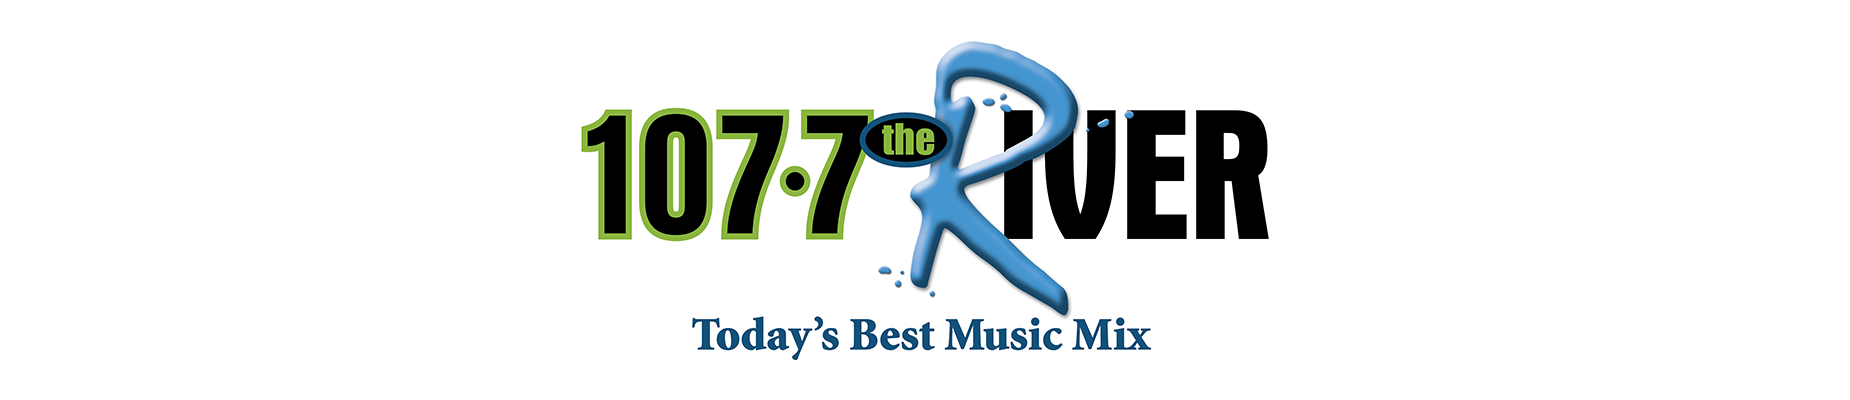 The River 107.7